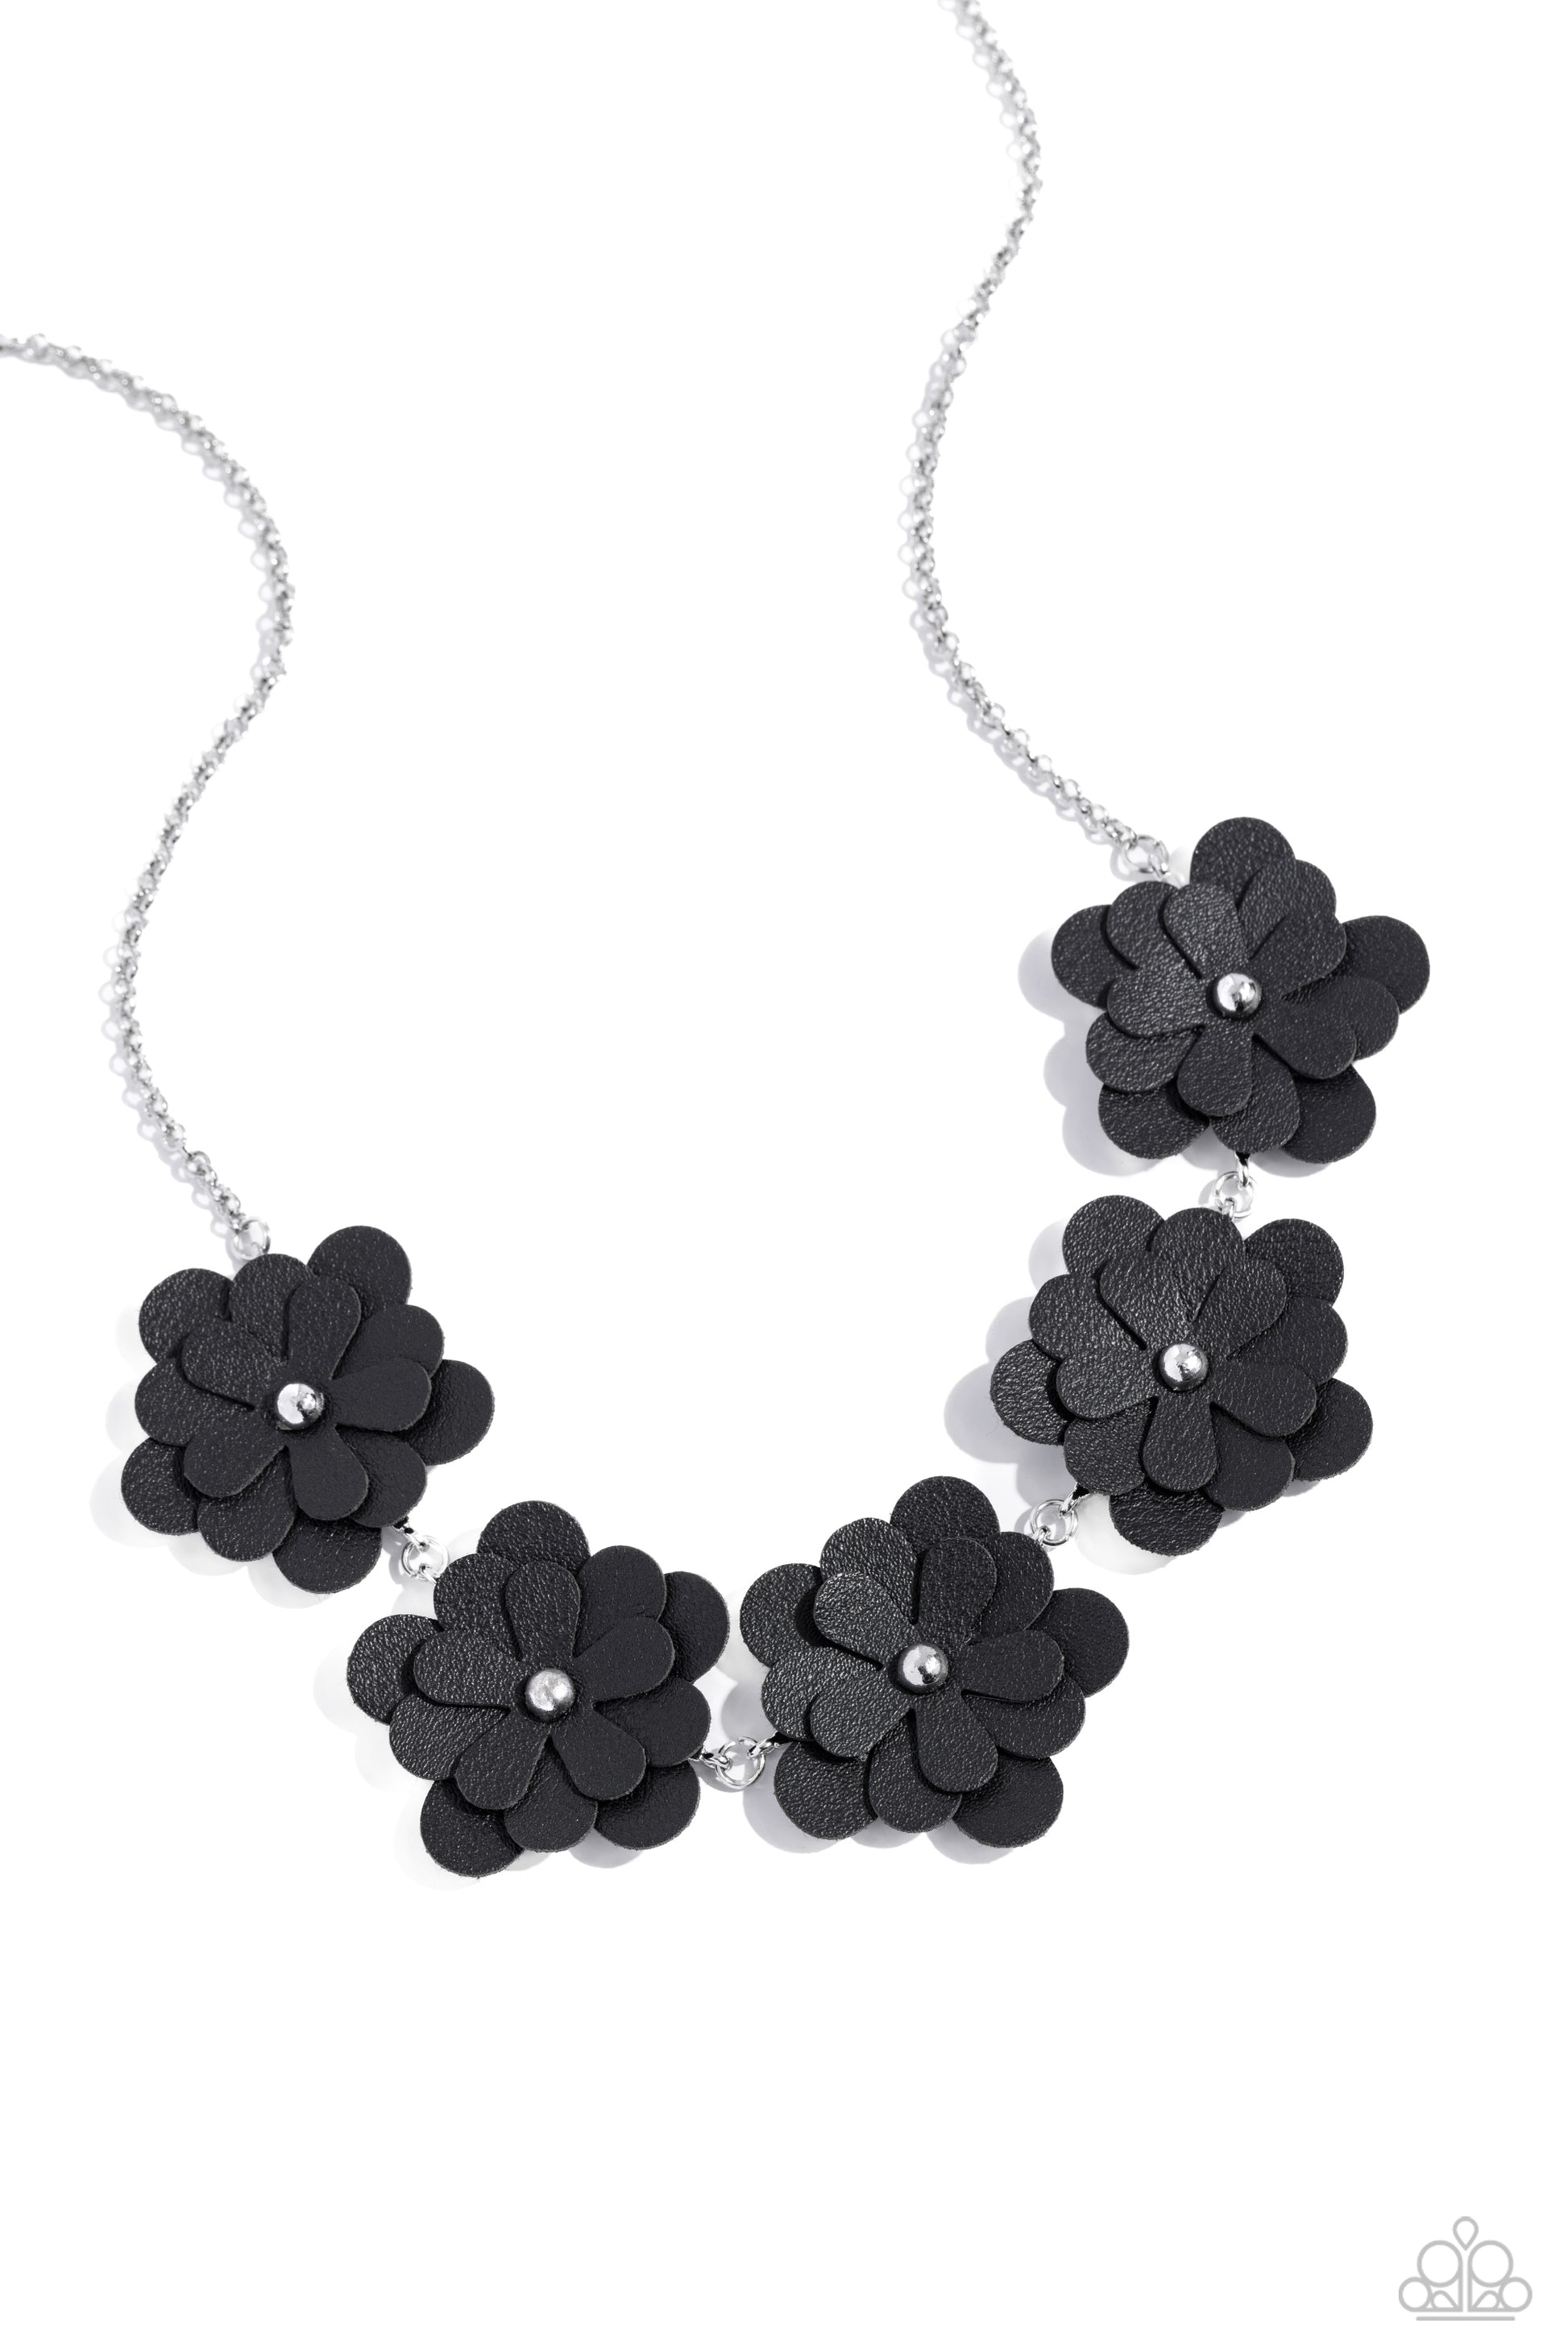 <p>Featuring silver stud centers, a collection of 3D black leather flowers connect to a classic silver chain for a ruggedly retro look. Features an adjustable clasp closure.</p> <p><i> Sold as one individual necklace. Includes one pair of matching earrings.</i></p>